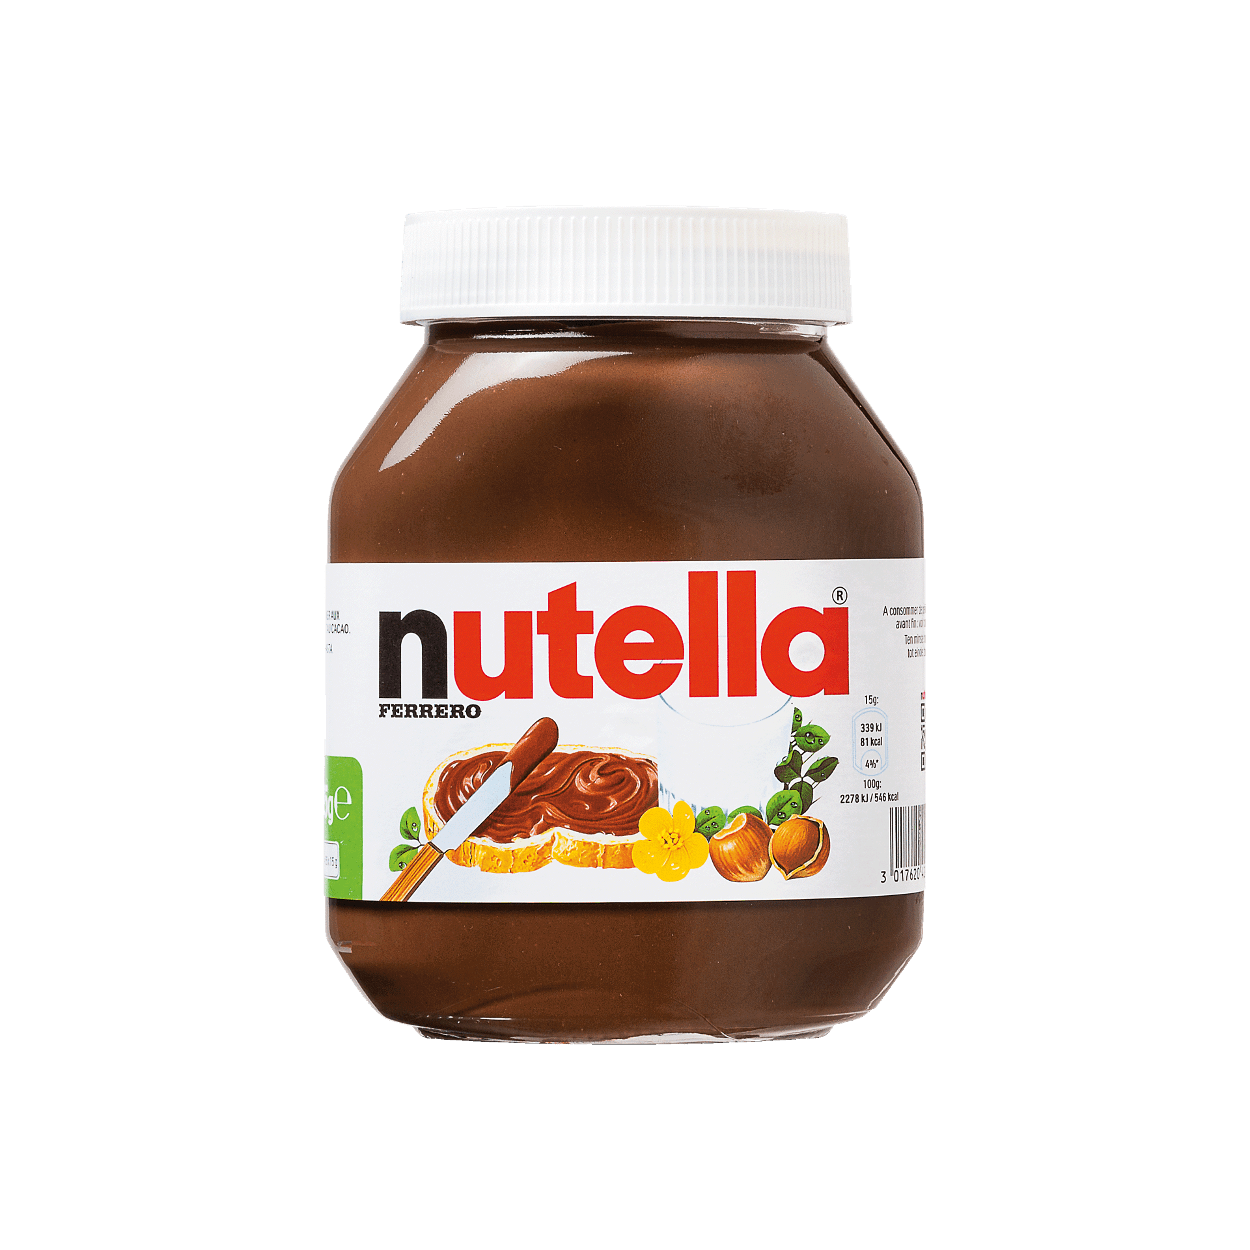 Nutella Free PNG